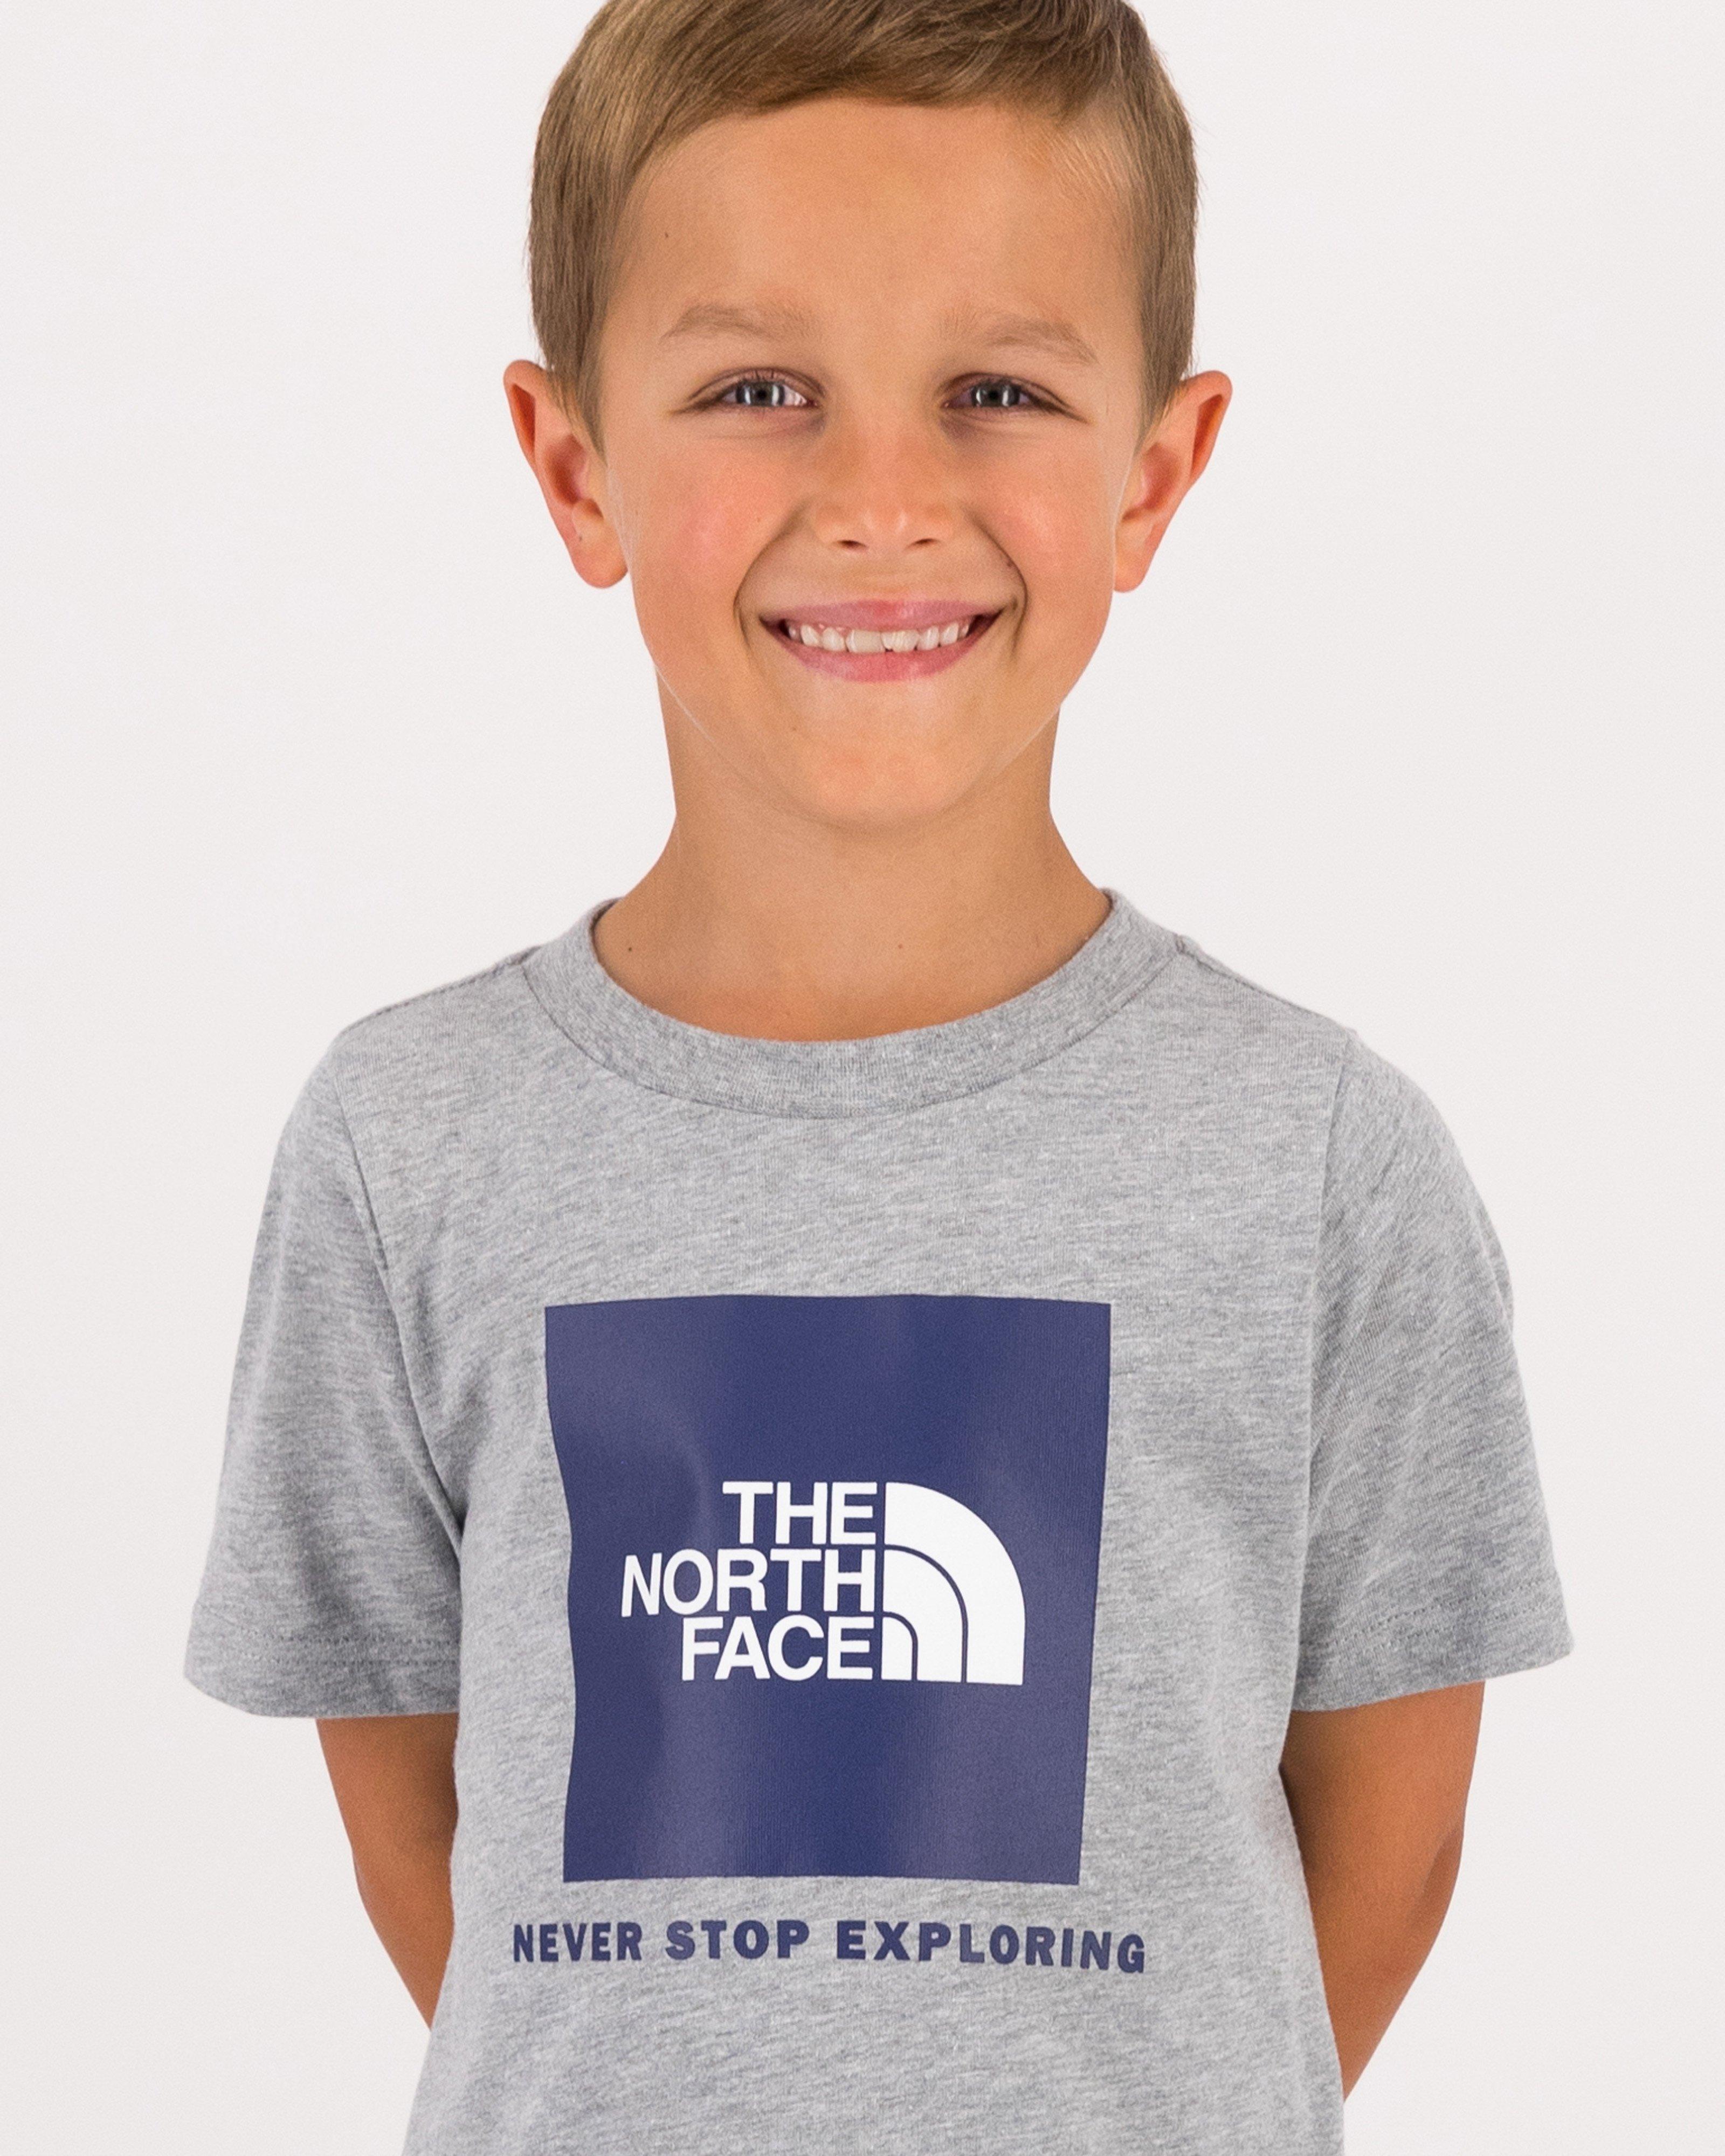 The North Face Boys’ Graphic T-shirt -  Grey